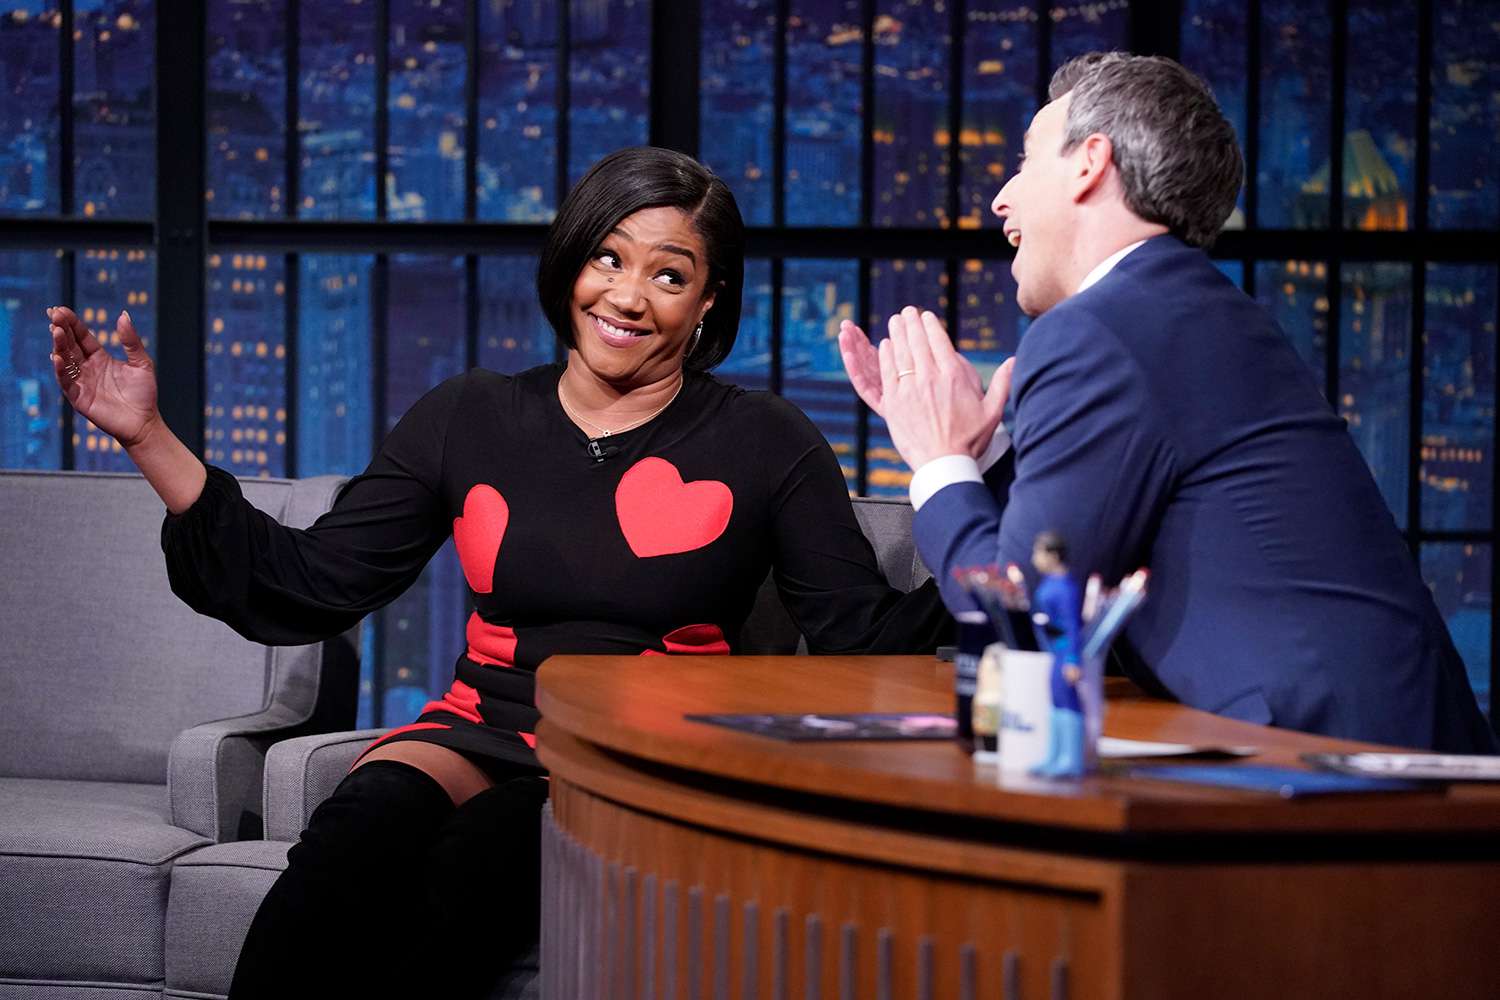 Tiffany Haddish during an interview with host Seth Meyers on January 8, 2020